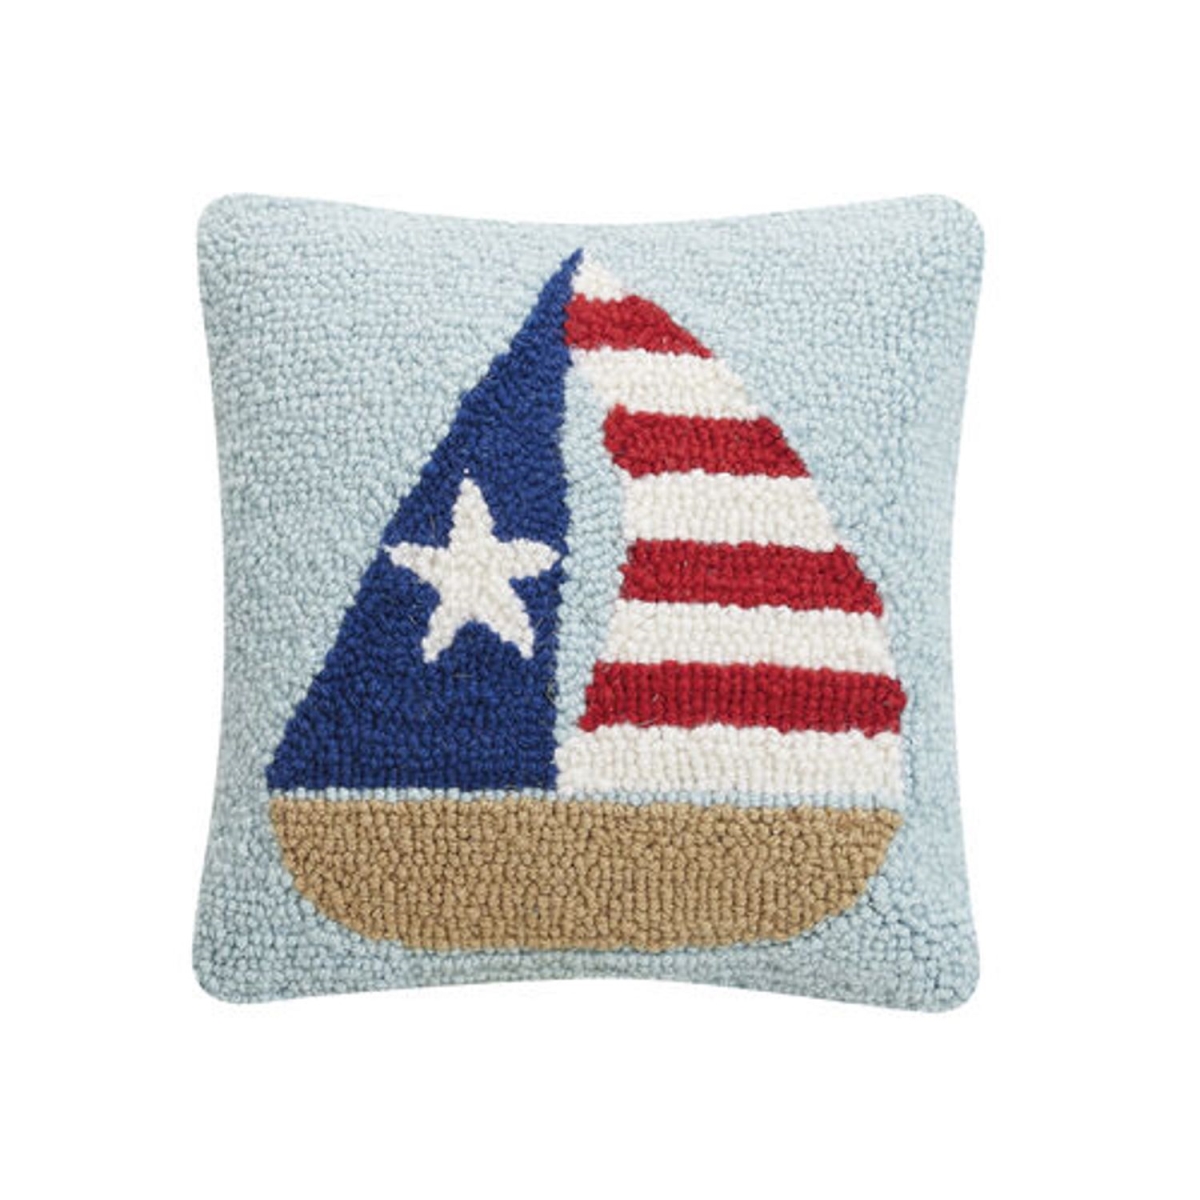 UPC 041808002551 product image for 30RN107C10SQ 10 x 10 in. Patriotic Boat Hook Pillow - Case of 3 | upcitemdb.com